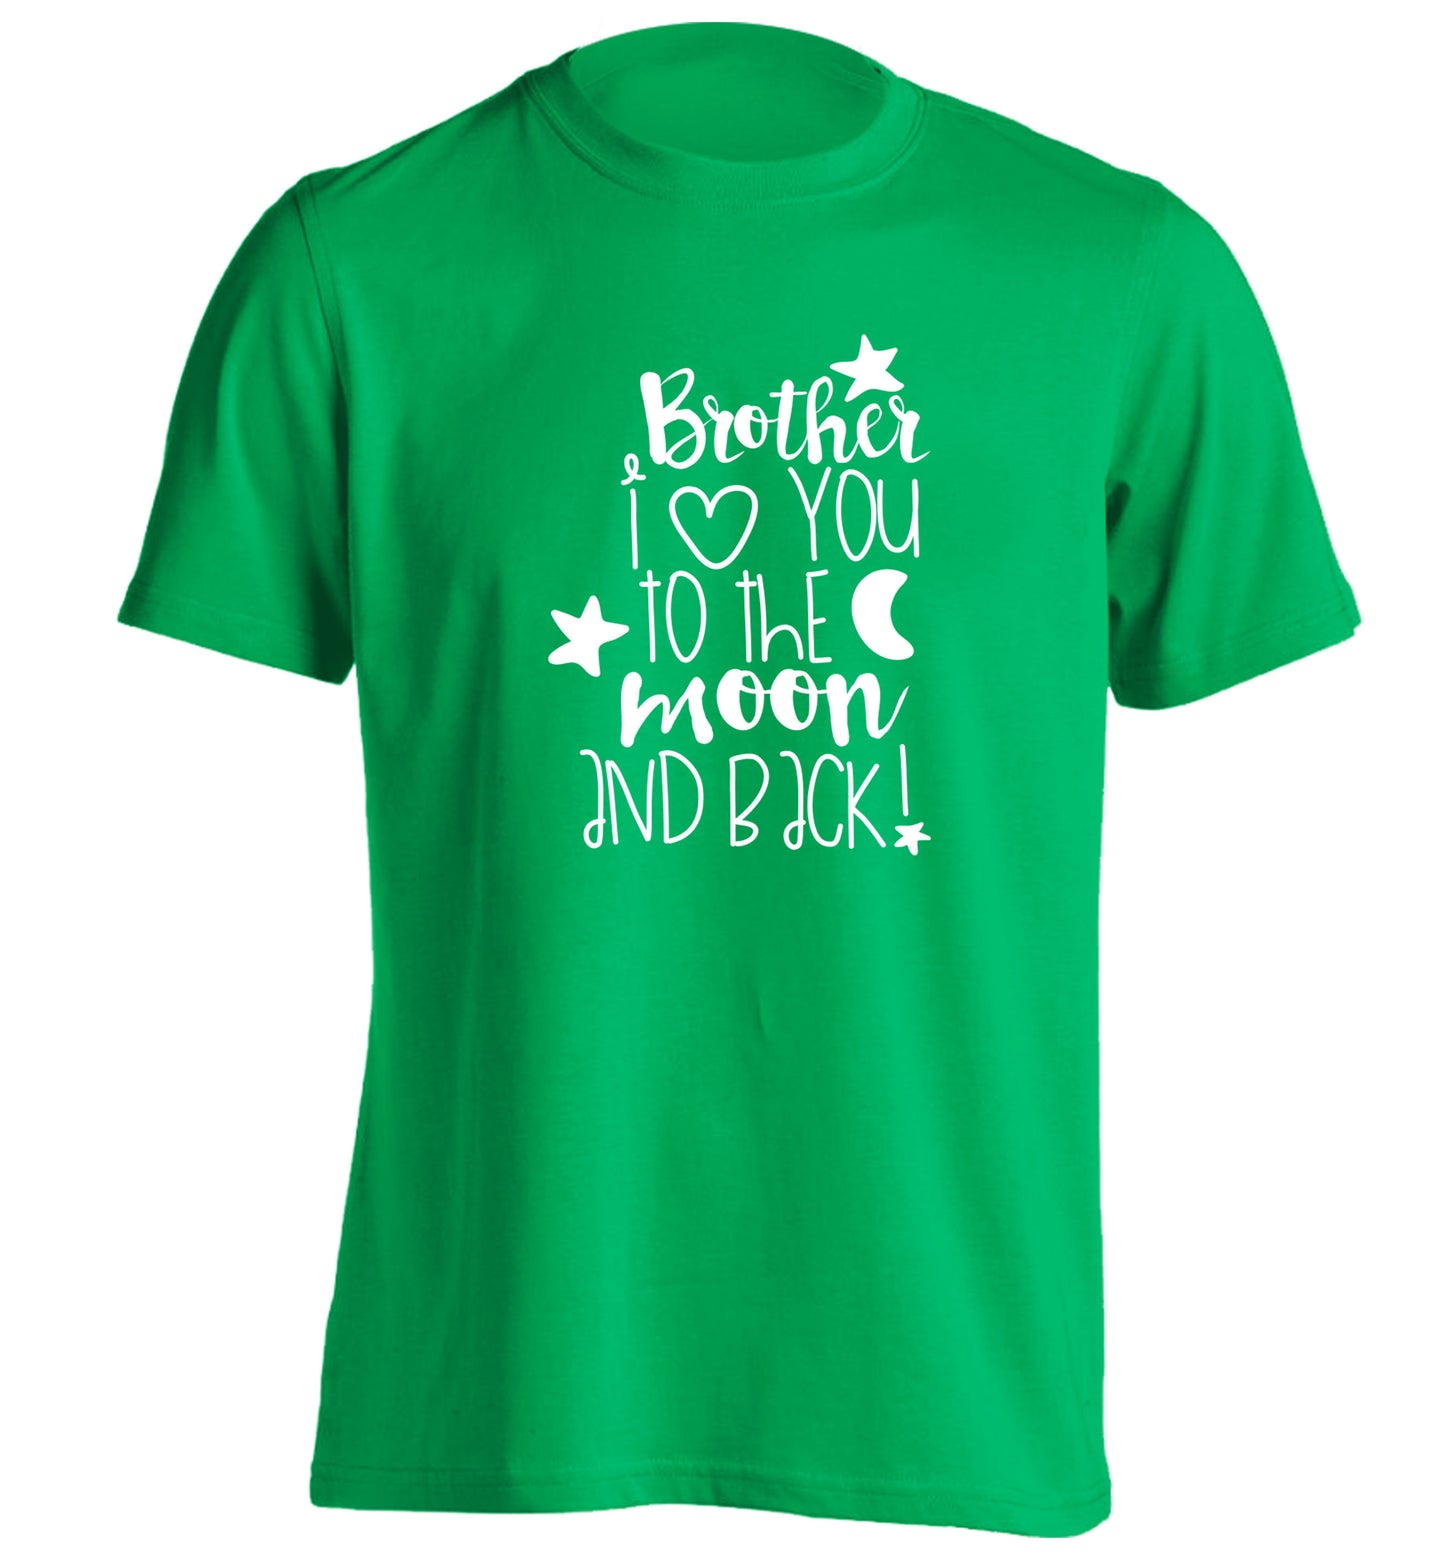 Brother I love you to the moon and back adults unisex green Tshirt 2XL